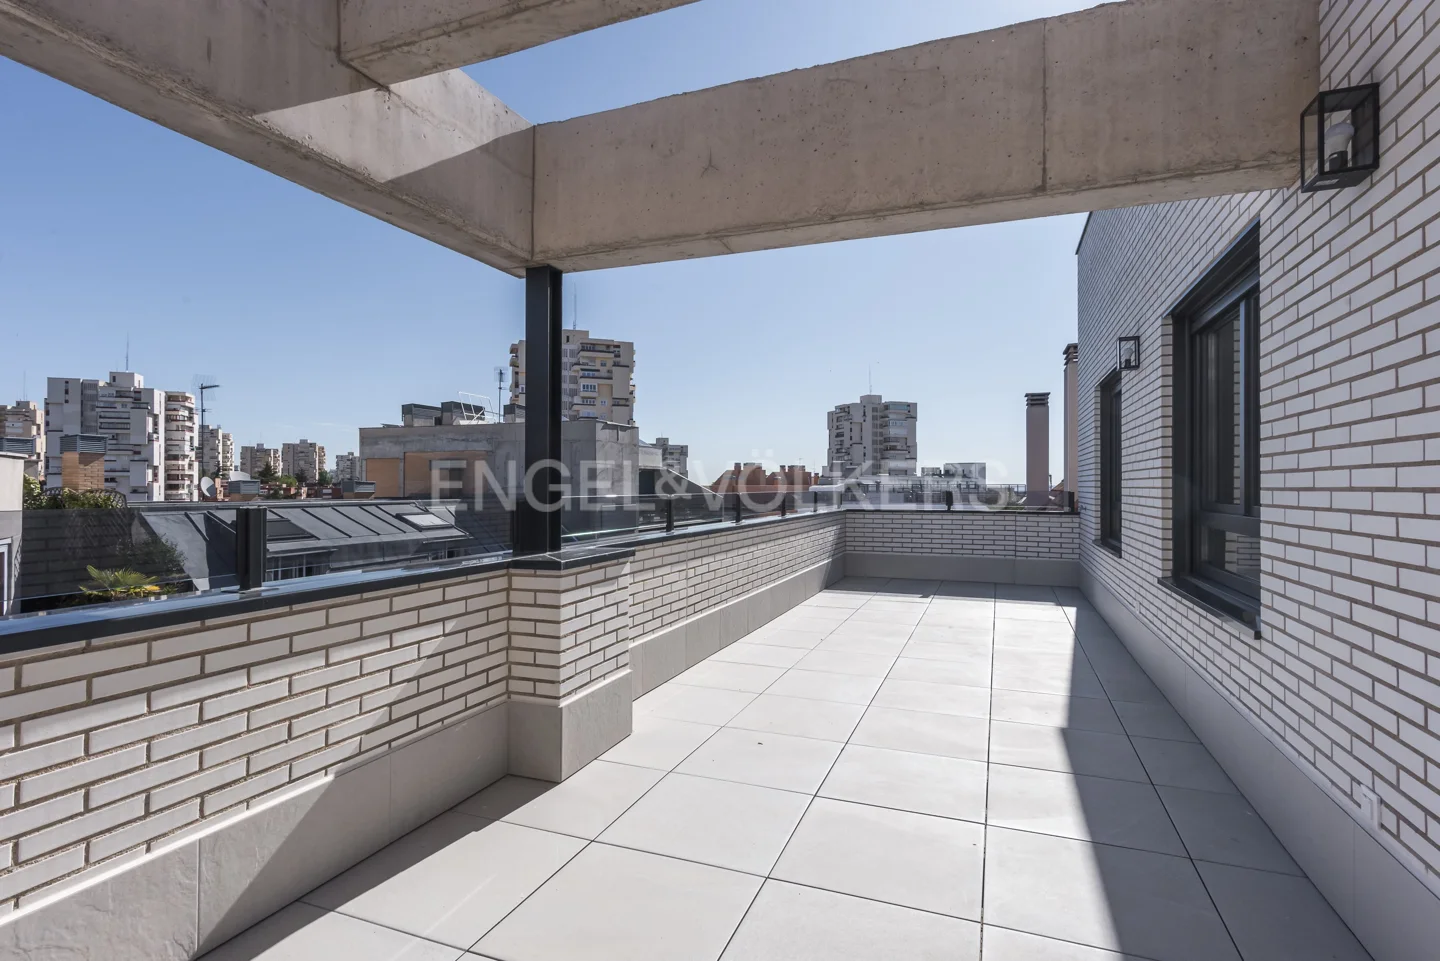 Great new construction penthouse with large terrace